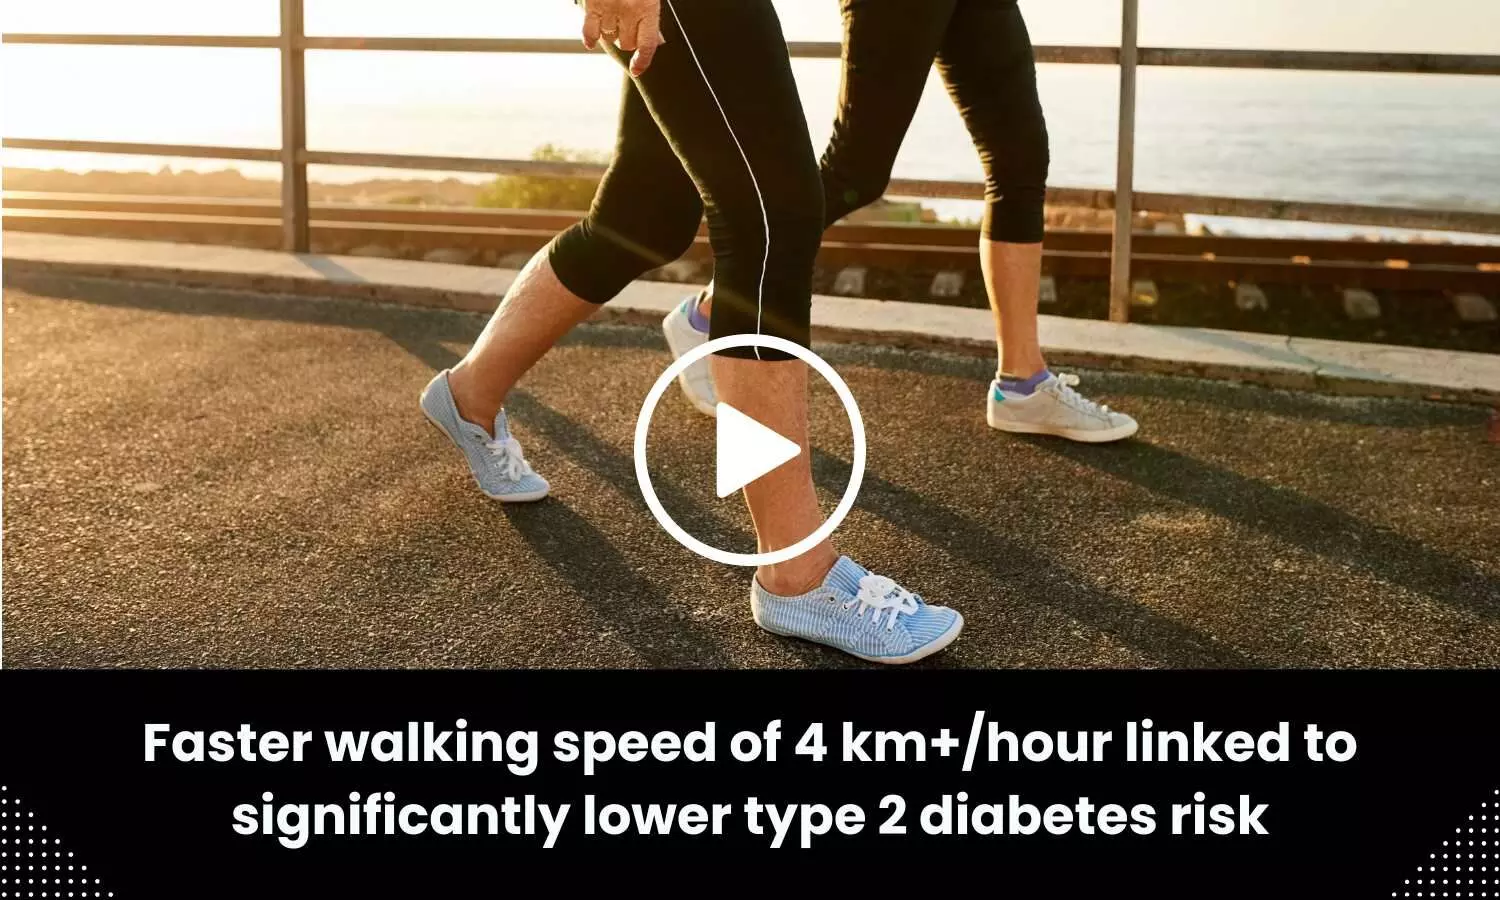 Faster walking speed of 4 km+/hour linked to significantly lower type 2 diabetes risk